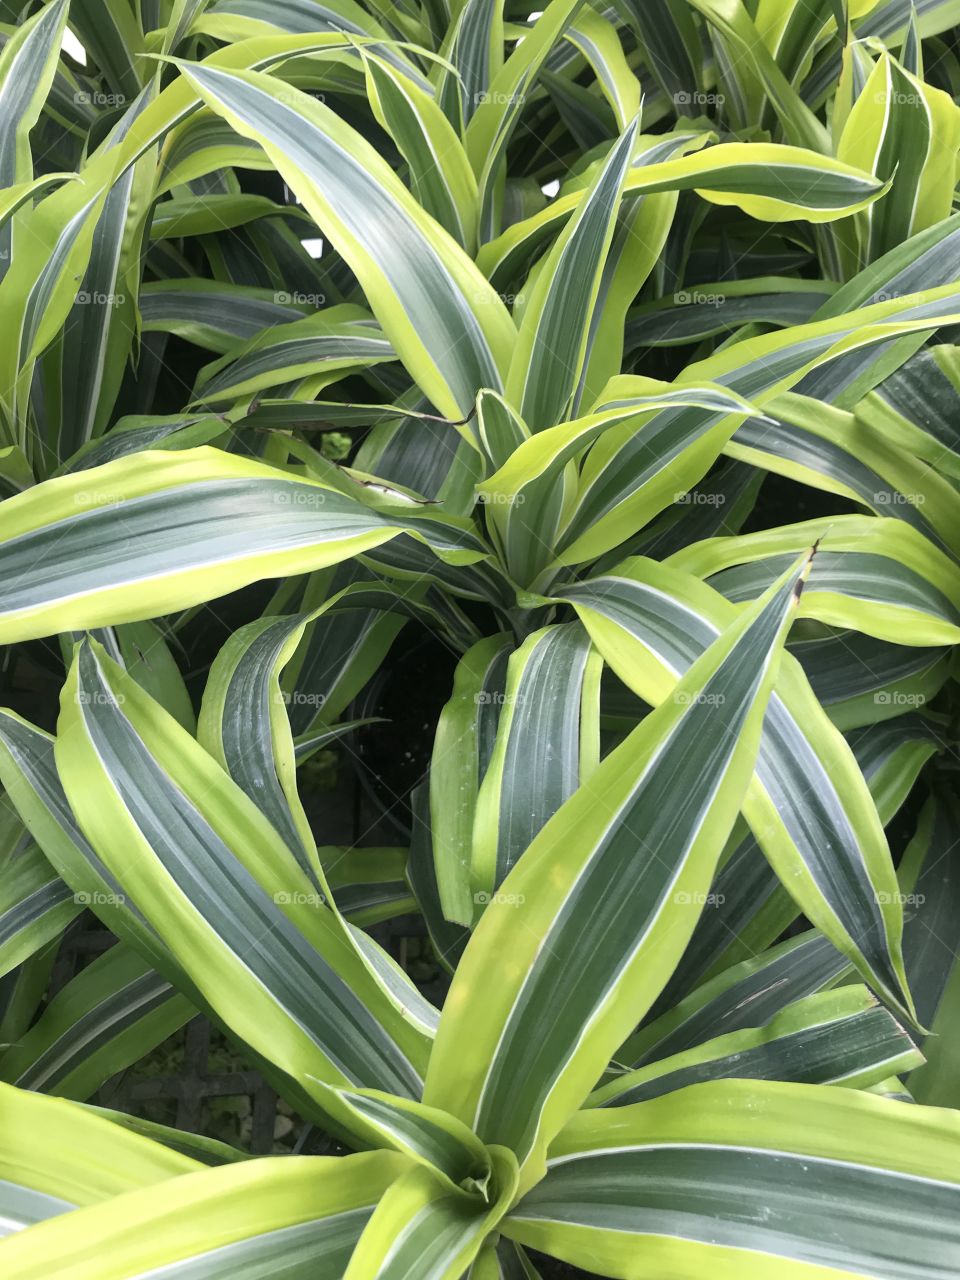 Tropical Foliage- Variations of Green Leaves